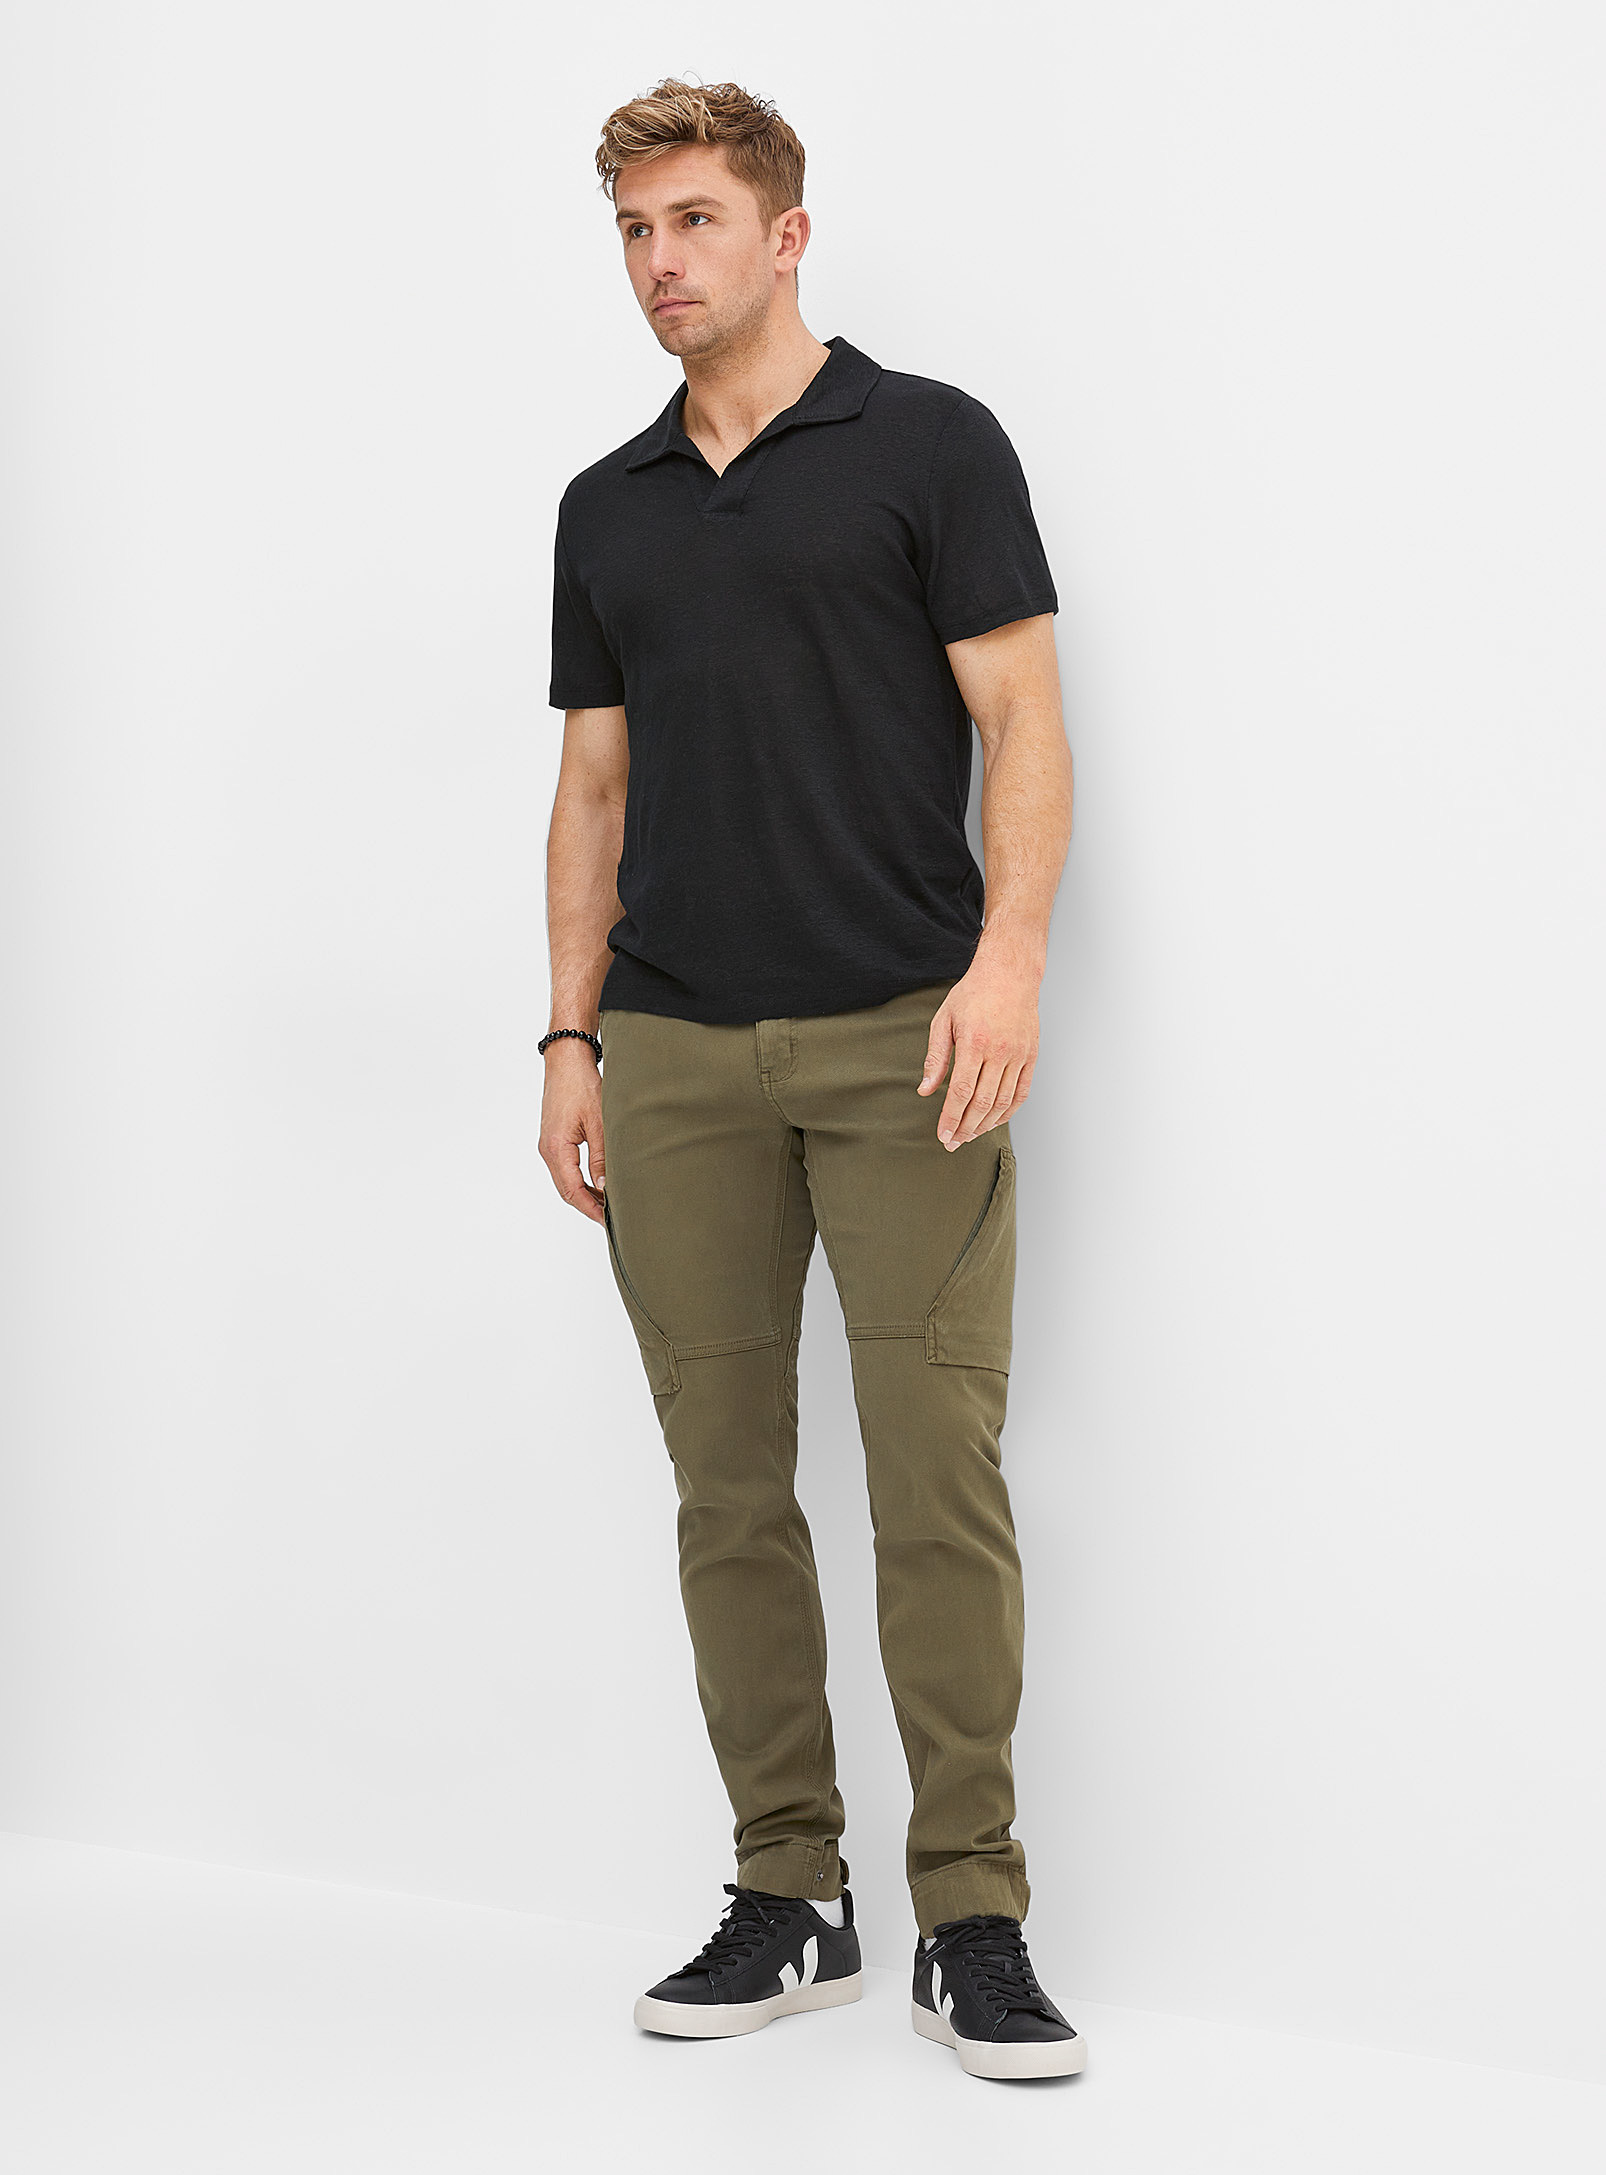 DUER - Live Free cargo pant